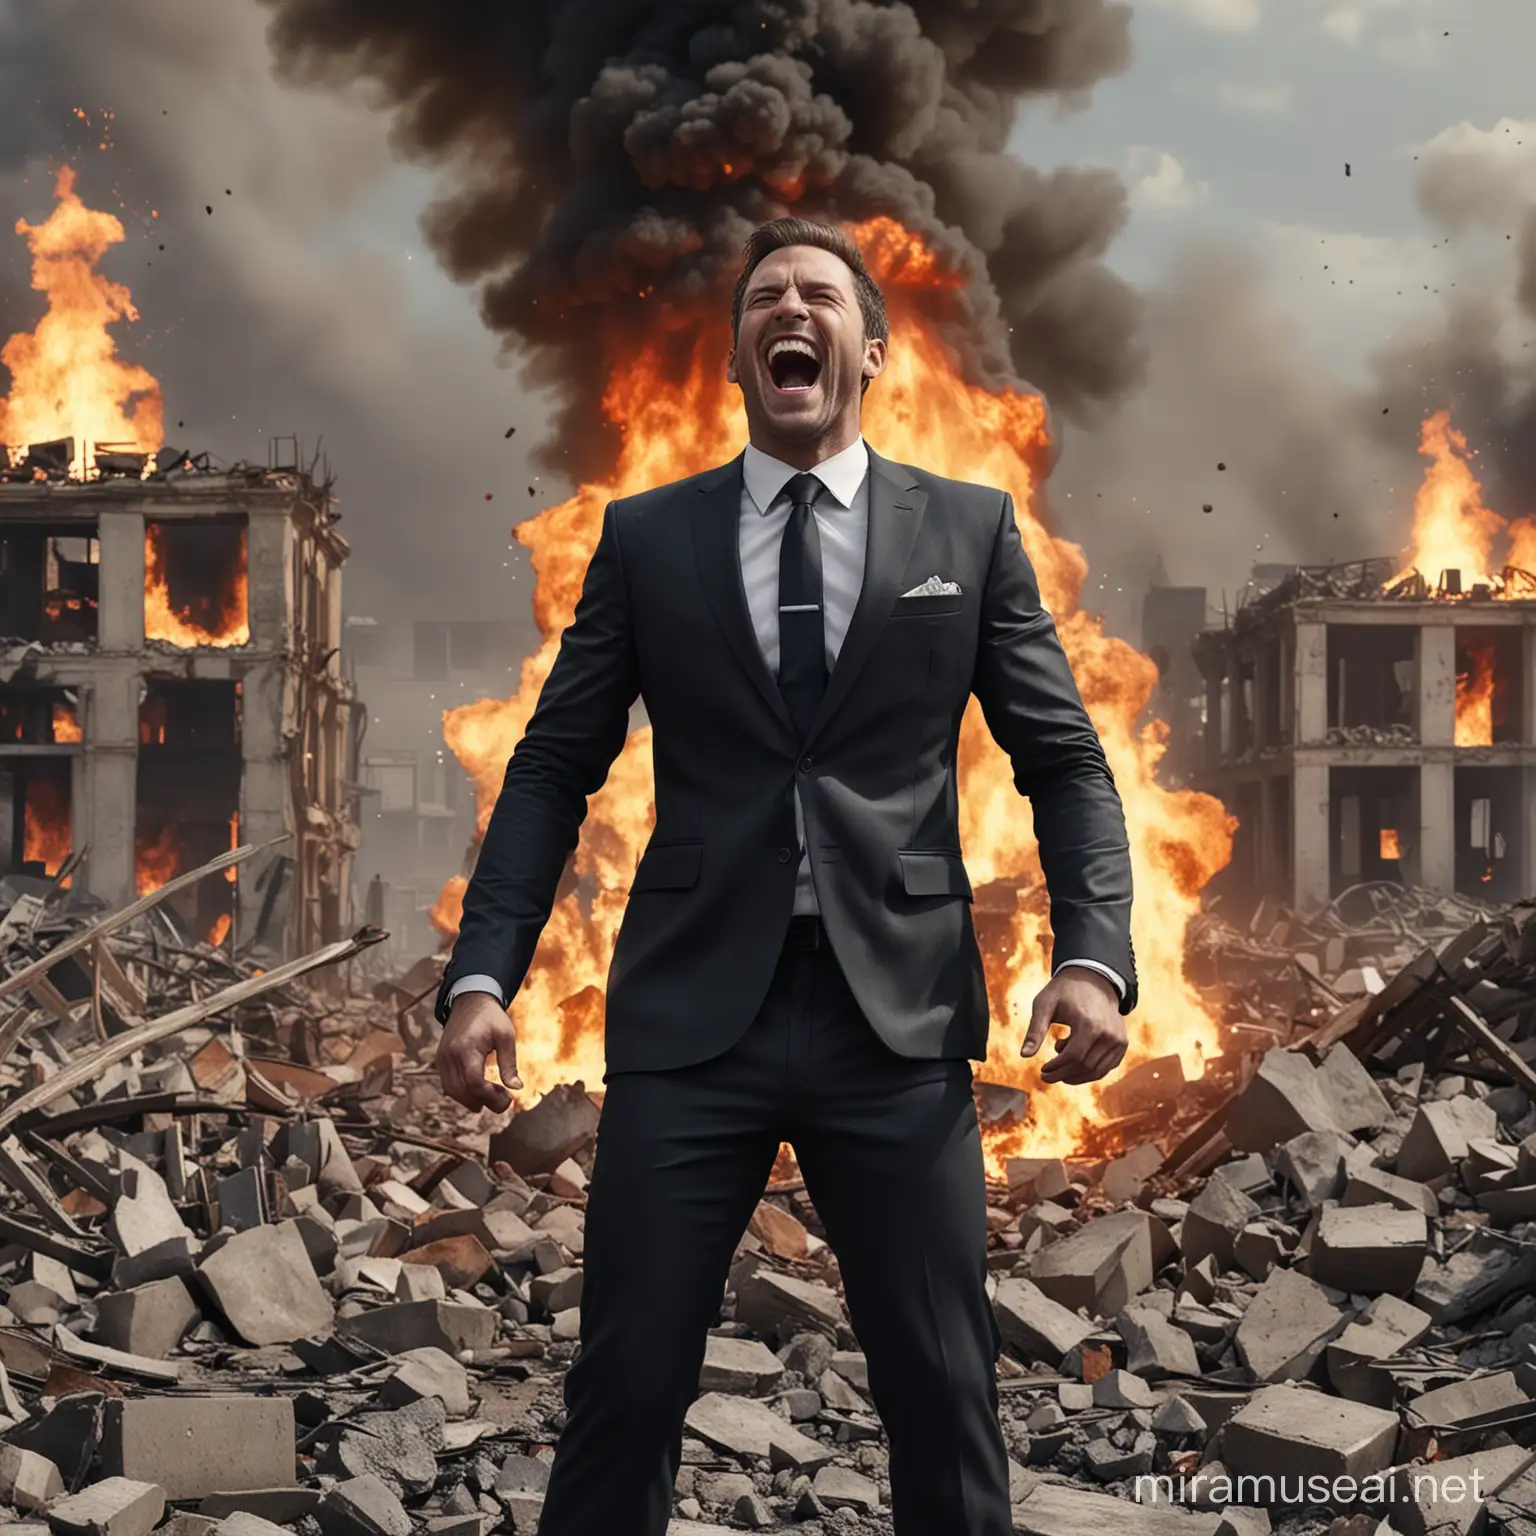 Man in suit standing in burning rubble and laughing, photorealistic
